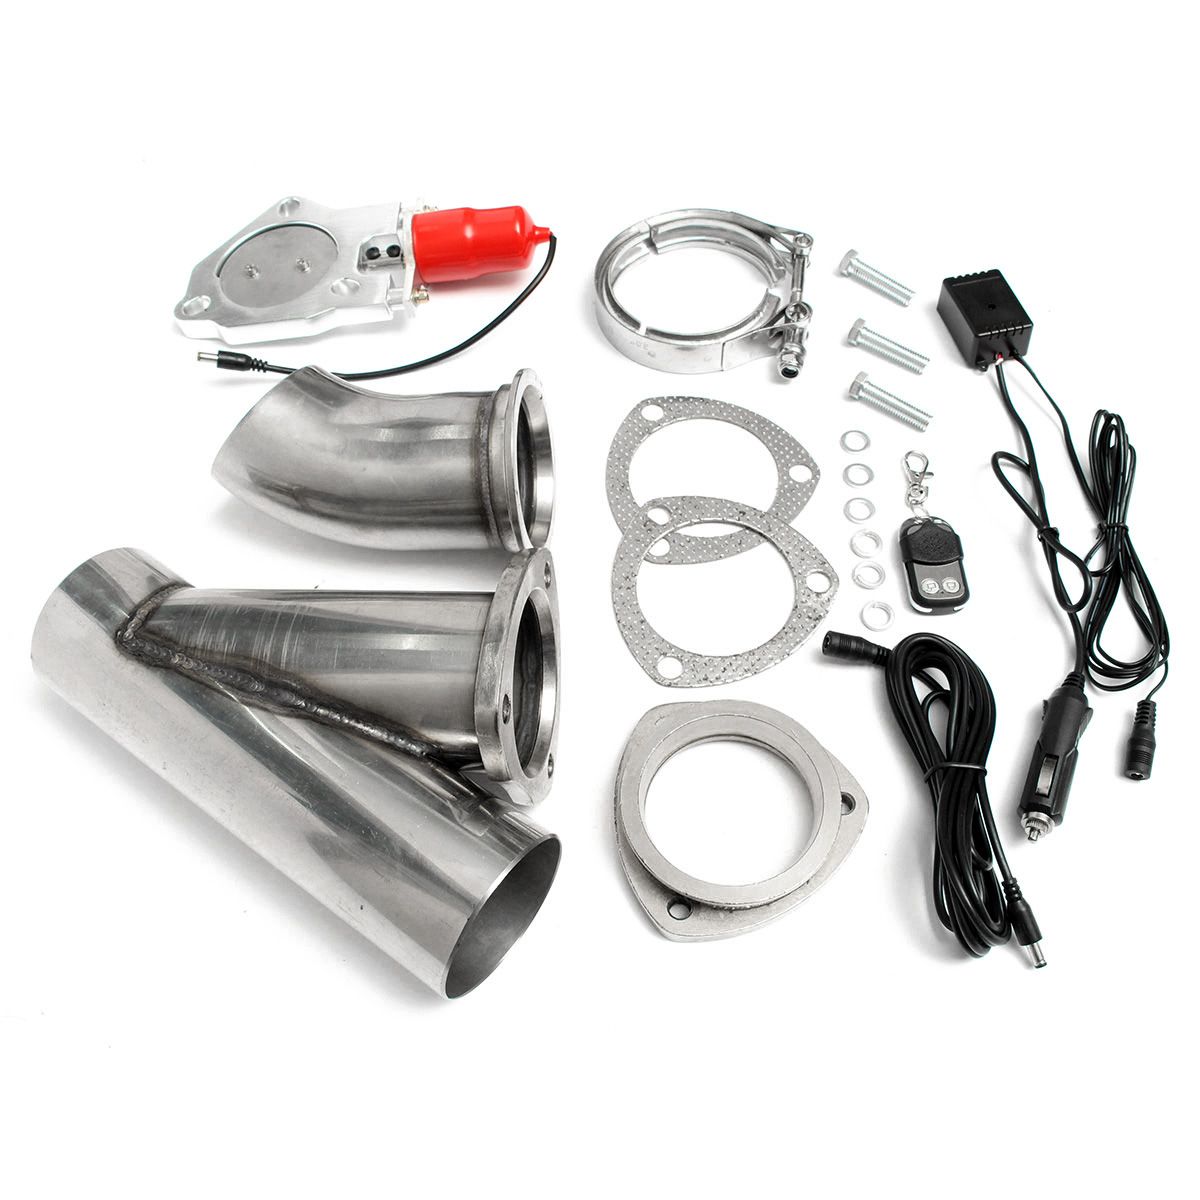 3-Inch-Electric-Exhaust-Valve-Catback-Down-Pipe-Systems-Kit-Remote-Intelligent-E-Cut-1172042